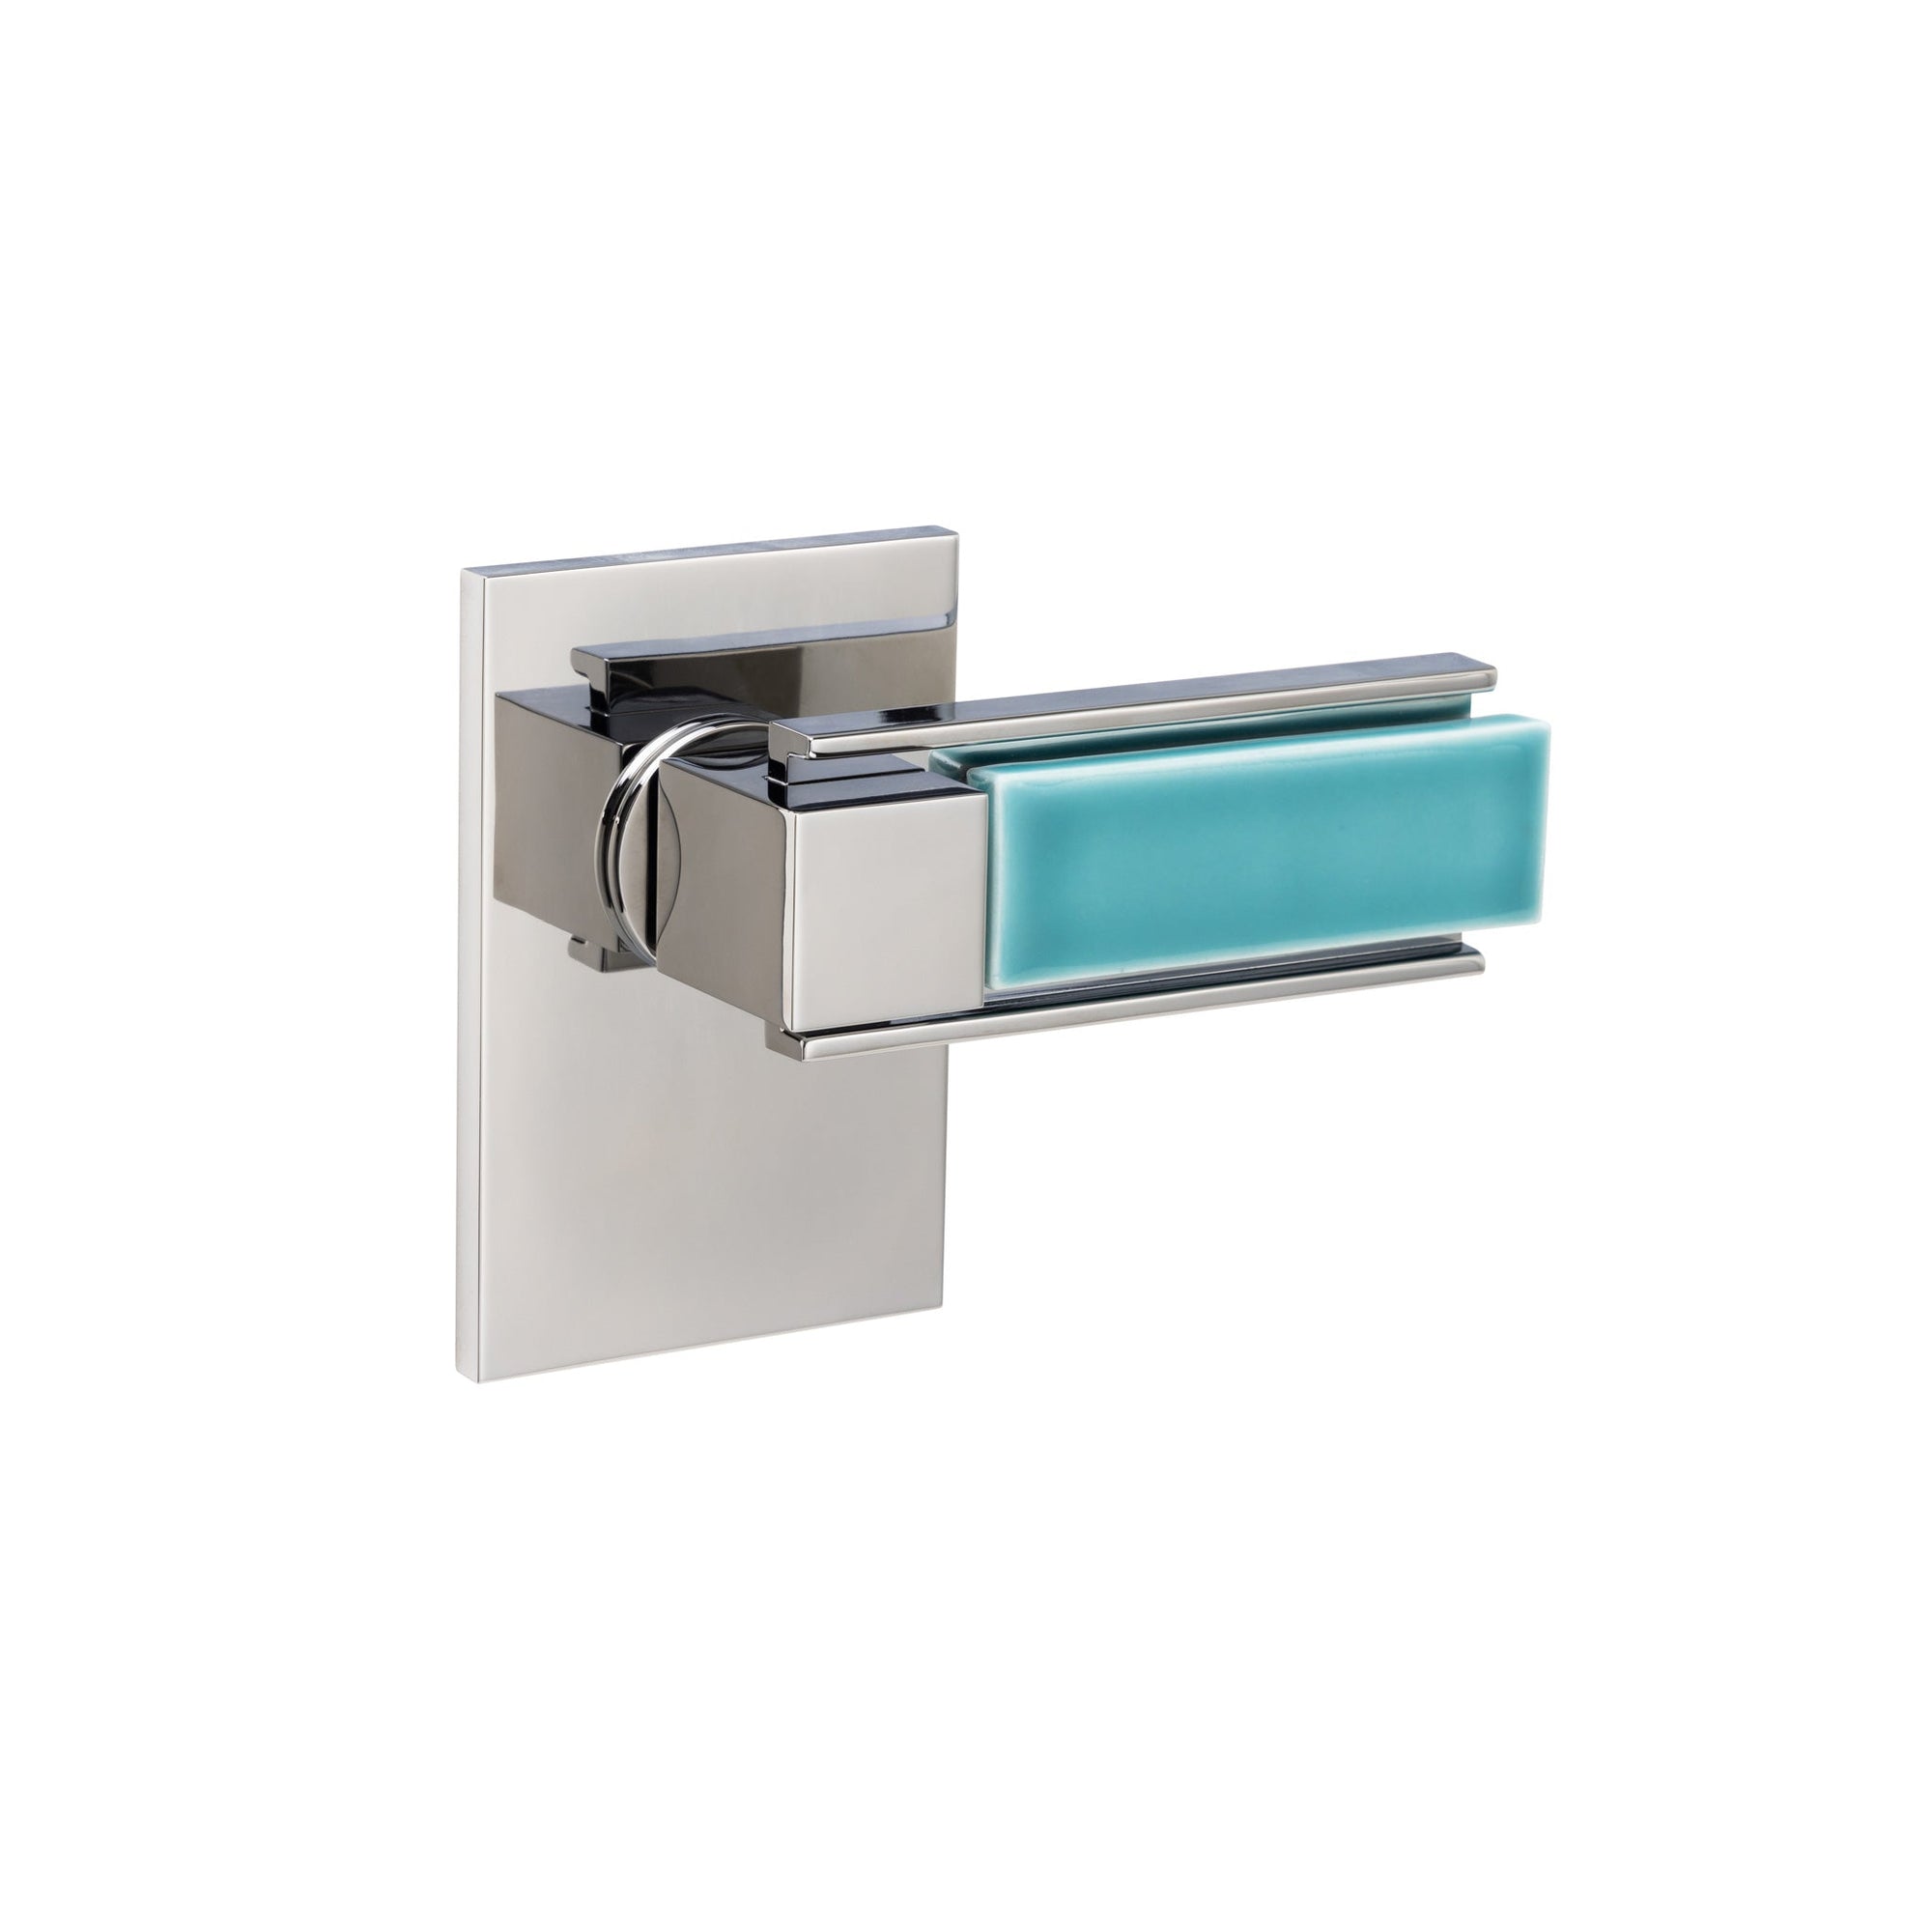 2120DOR-RH-BL01-CP Sherle Wagner International The Apollo Door Lever with Ceramic Insert in Polished Chrome metal finish